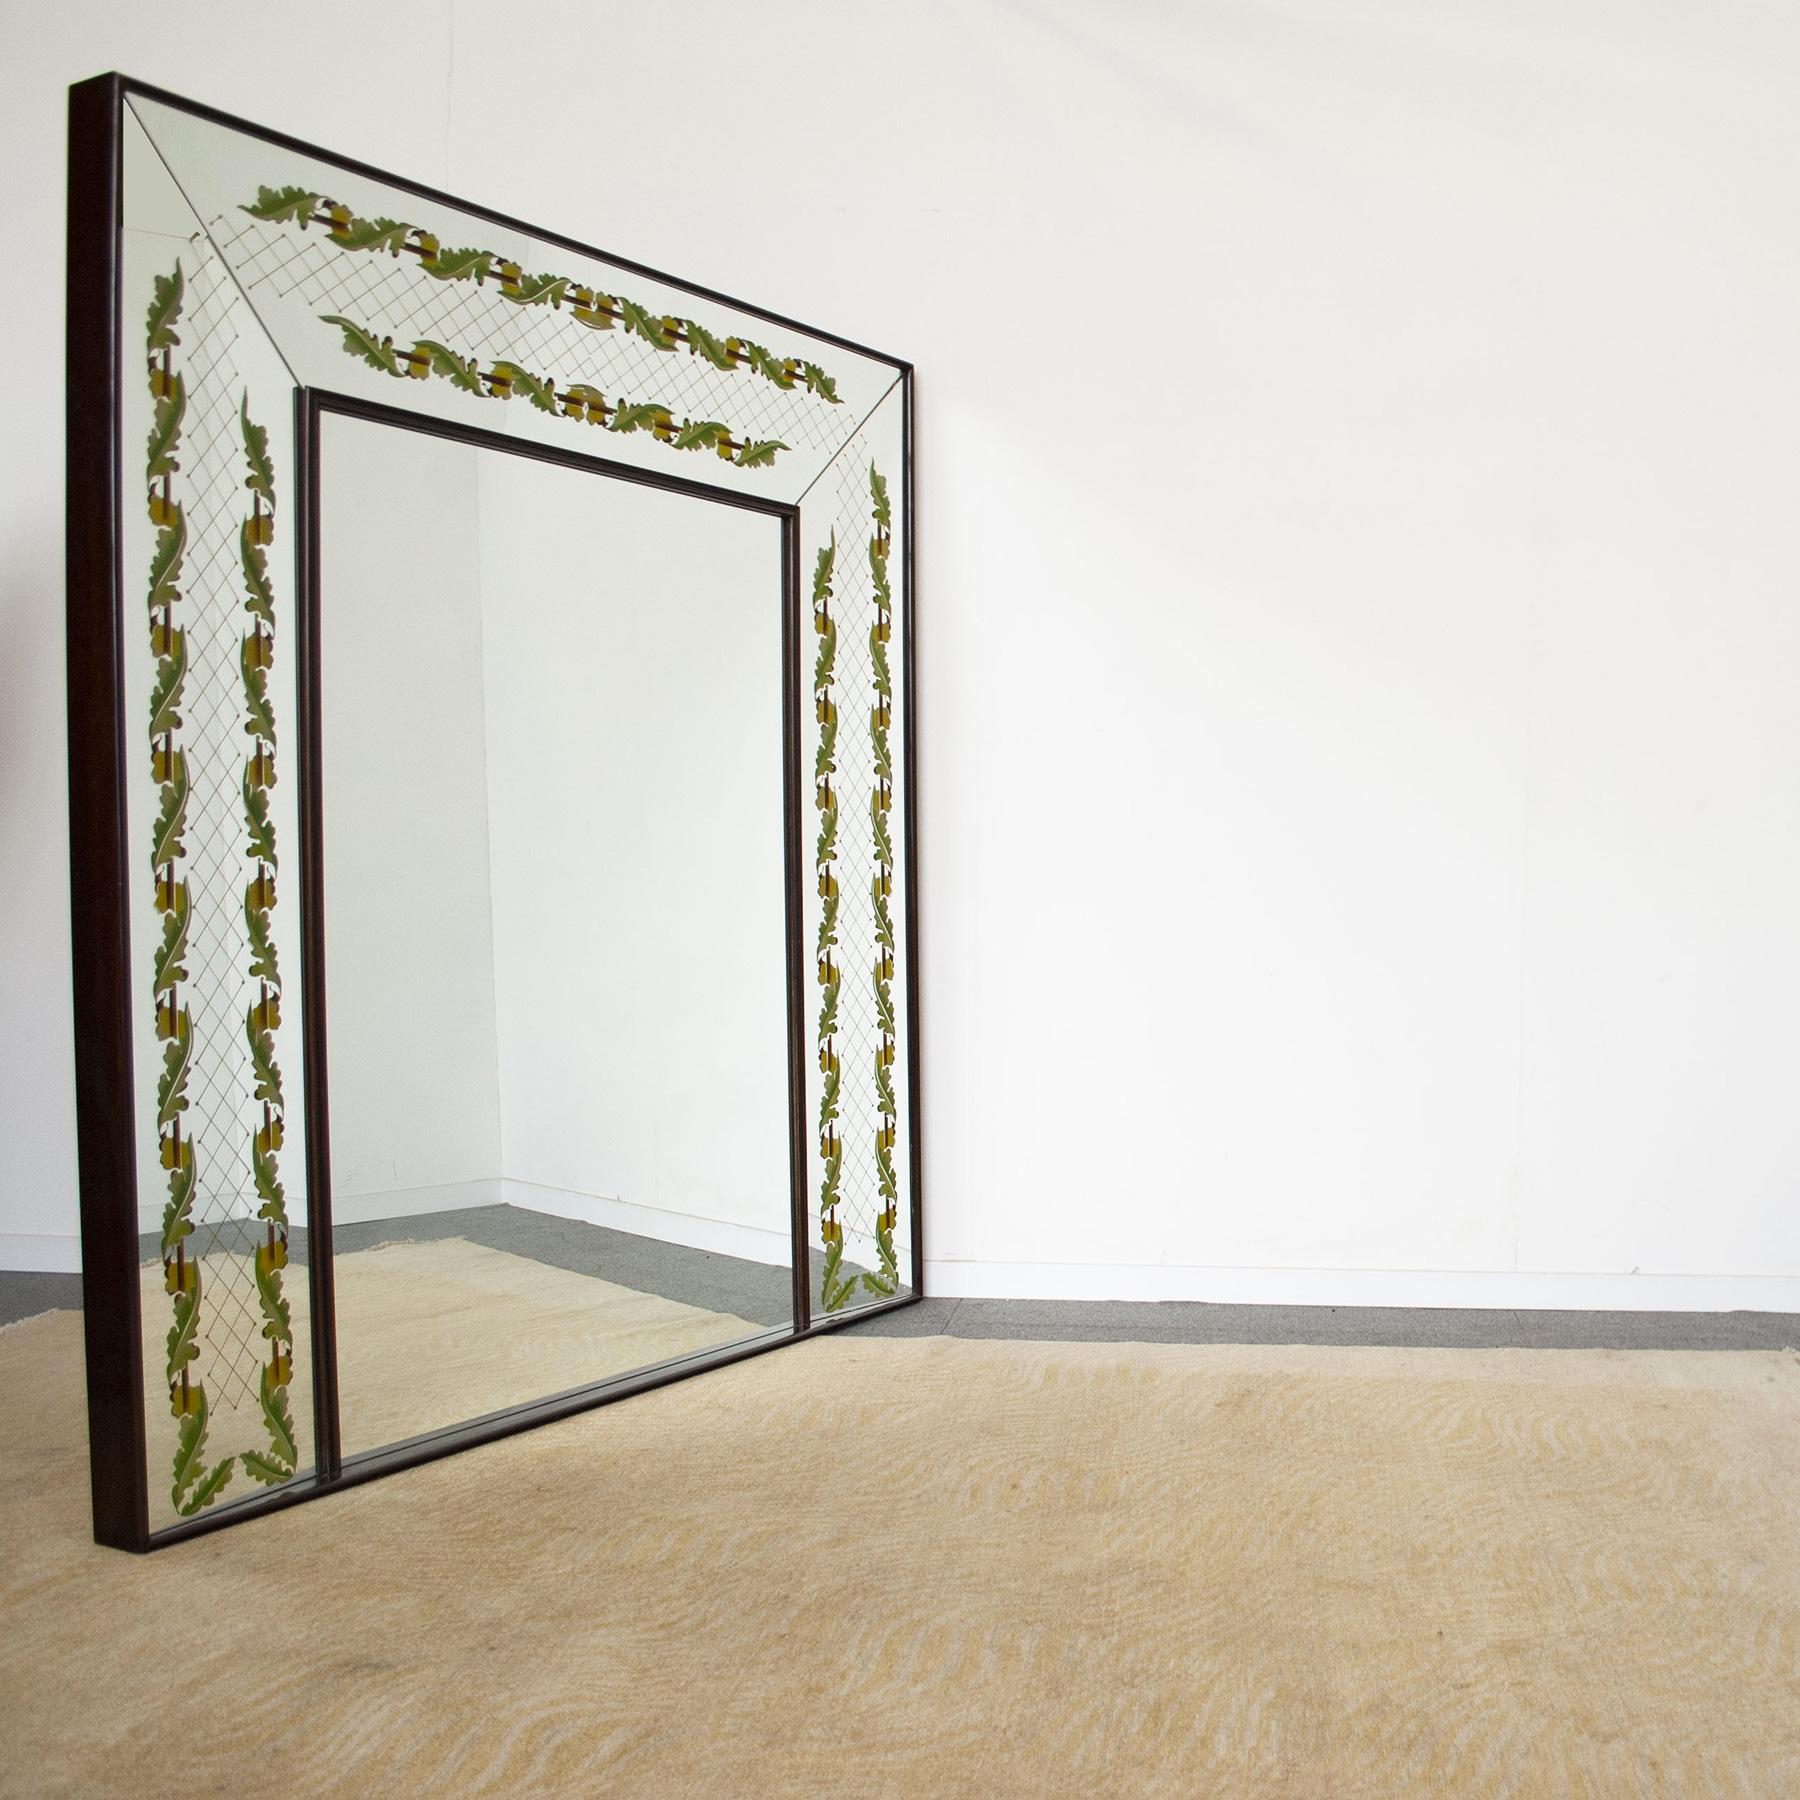 Monumental backlit mirror with graphic engraving on the perimeter with wooden frame, production end 40’s Luigi Brusotti, probably made by Fontana Arte .